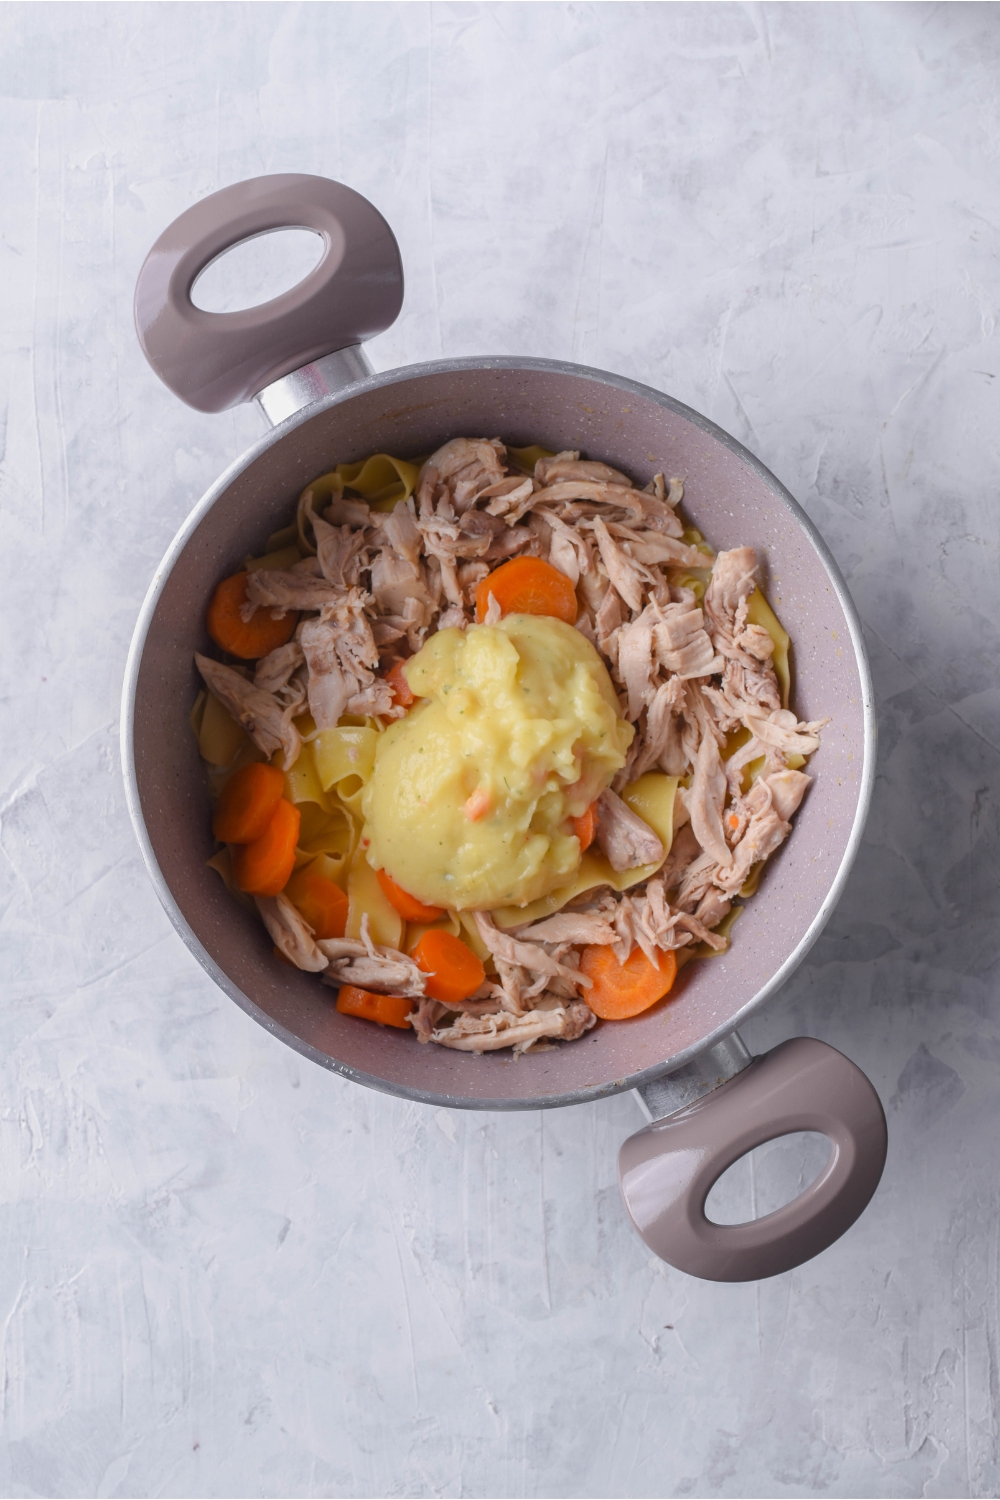 Grey pot filled with cooked shredded chicken, cooked carrots, egg noodles, and a dollop of condensed soup in the center.